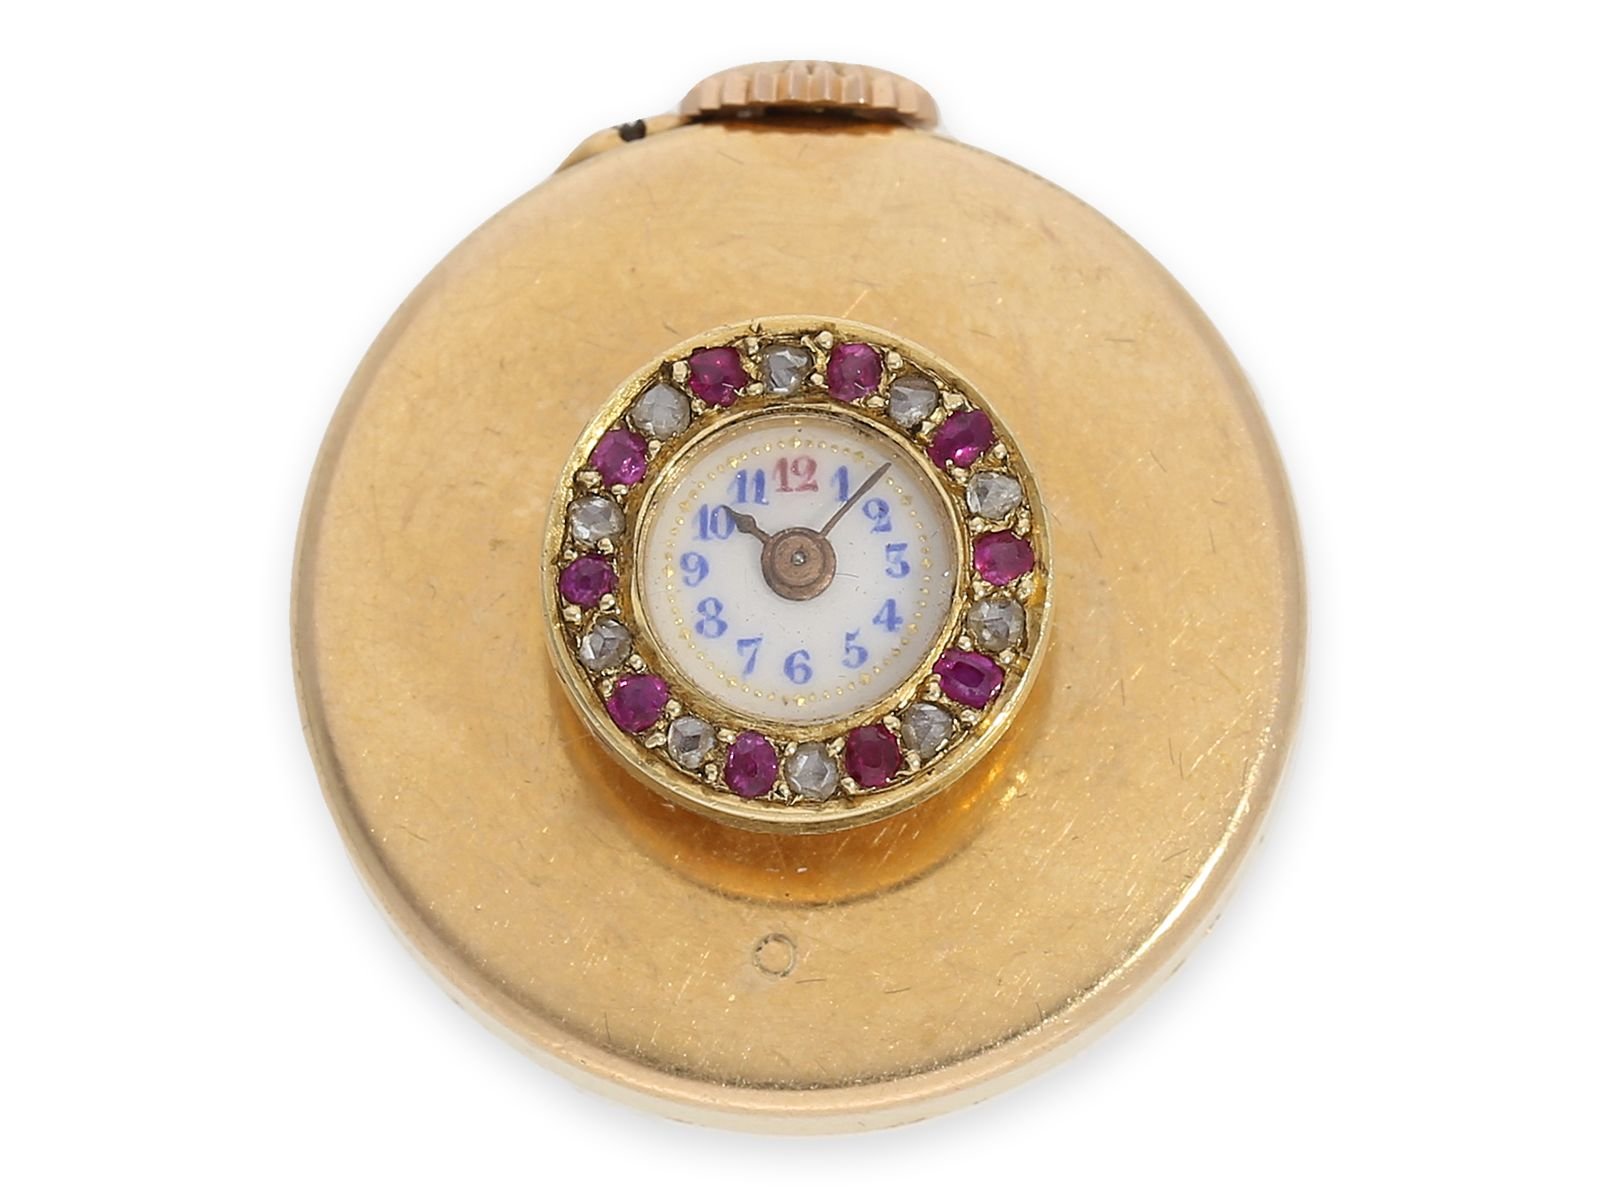 Buttonhole watch: extremely rare buttonhole watch in 18K gold with diamond and ruby setting, punched